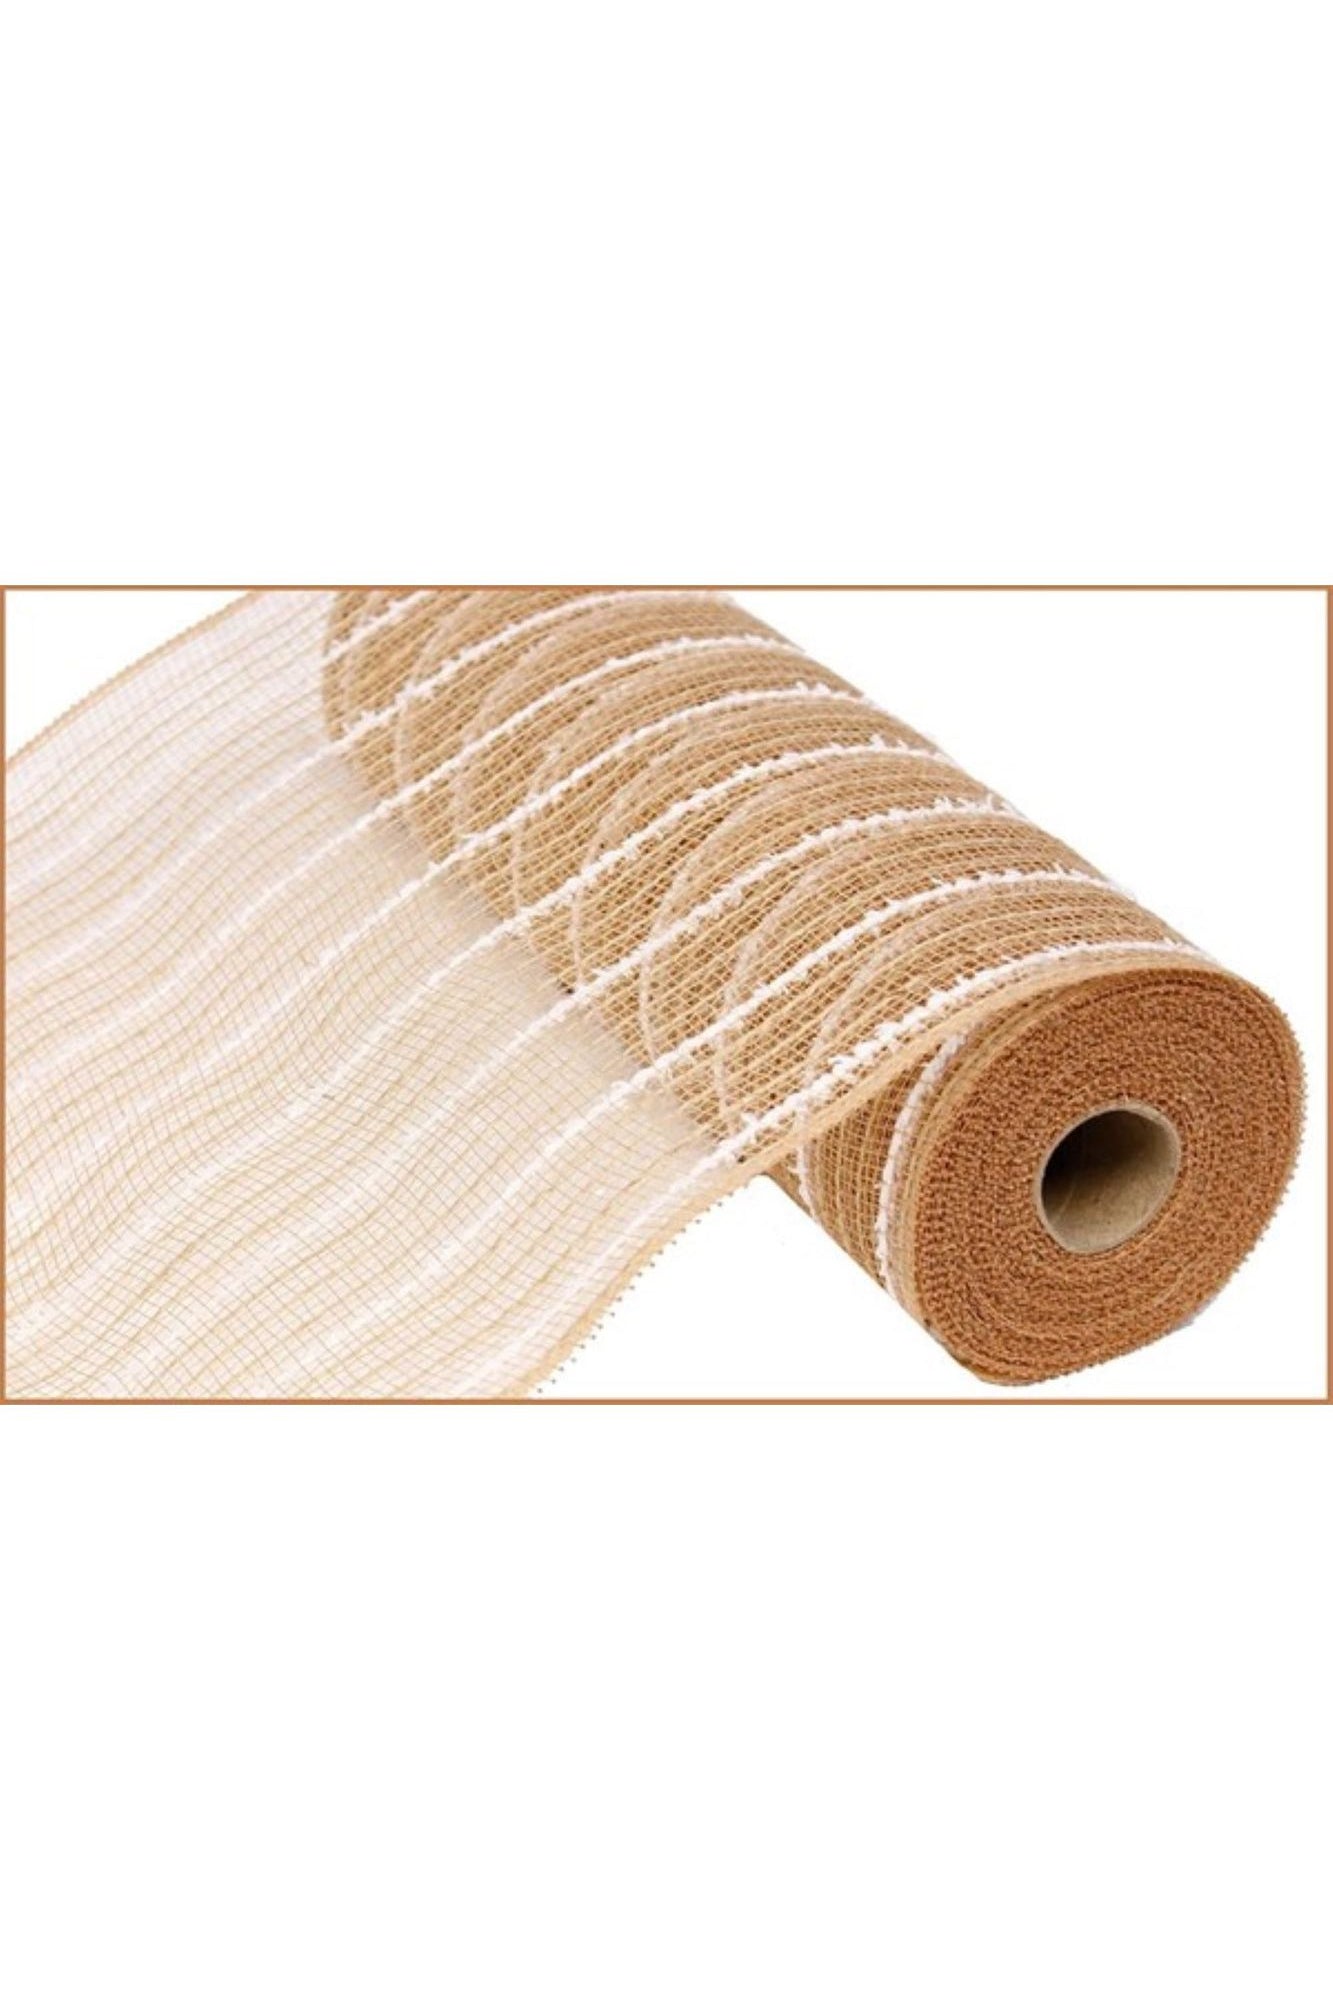 Shop For 10.5" Cotton Drift Poly Jute Mesh: Natural (10 Yards) RY810118